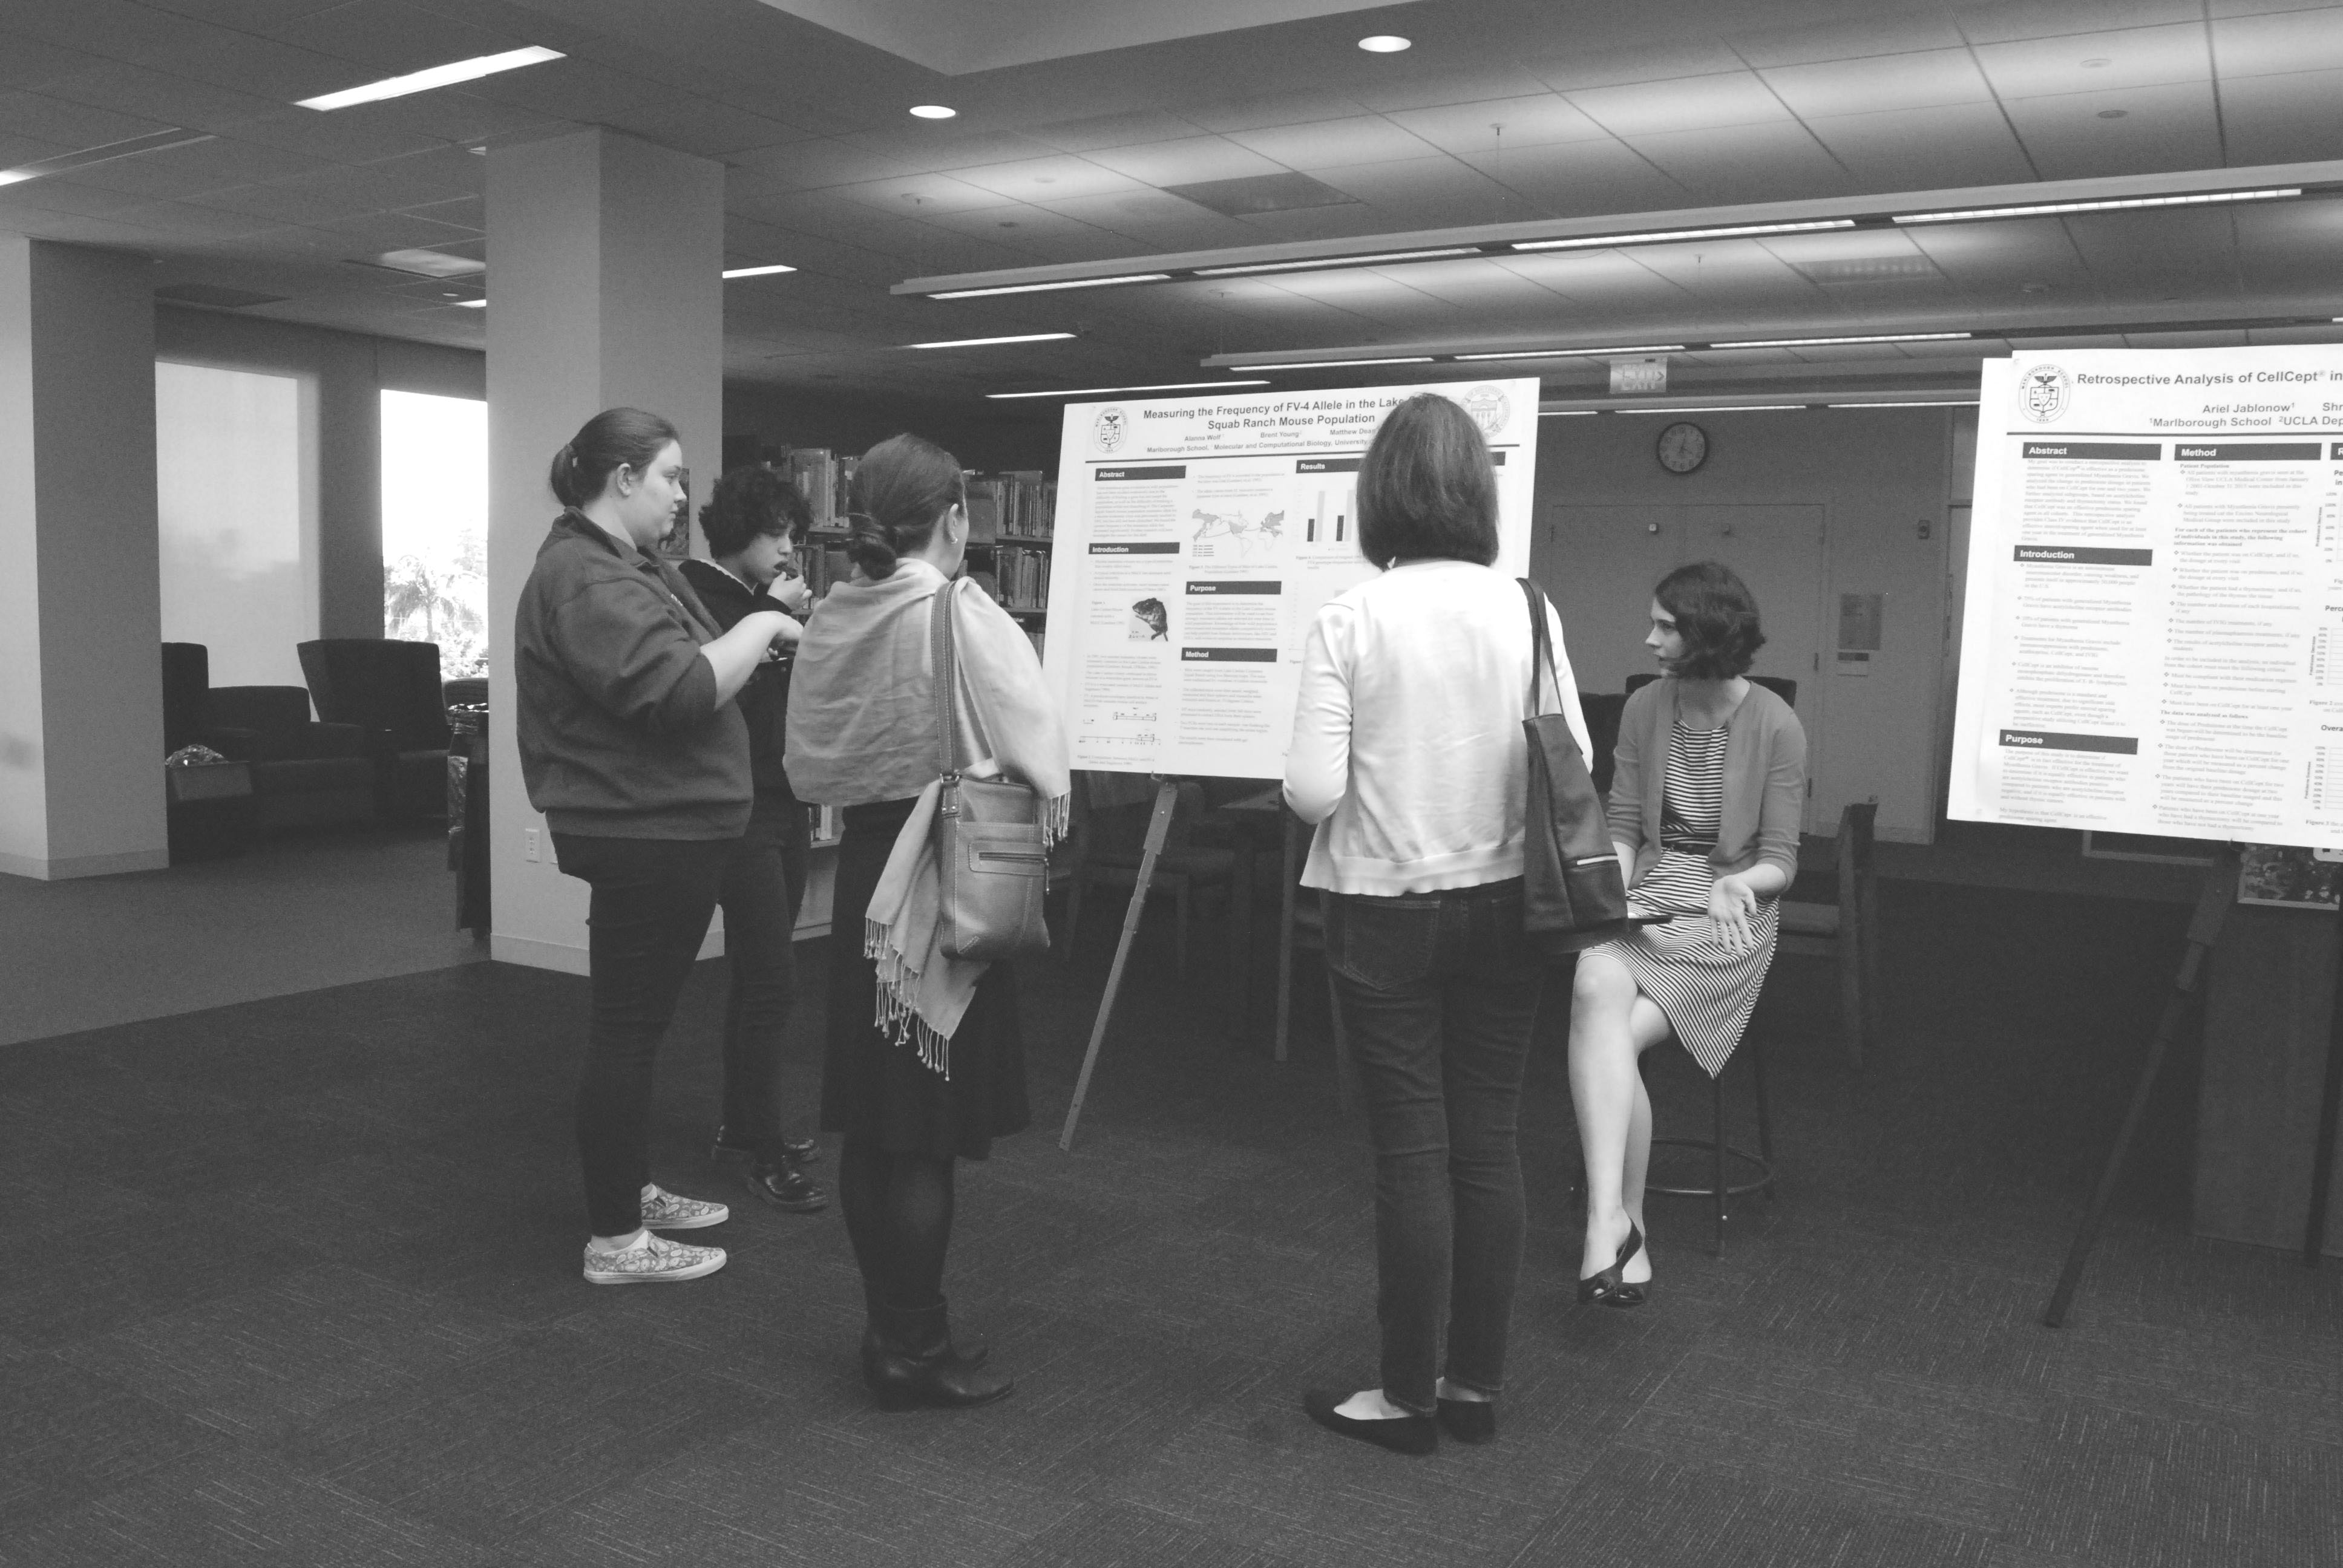 Alanna '16 presents her Honors Research in Science poster. Photo by Sora '18.